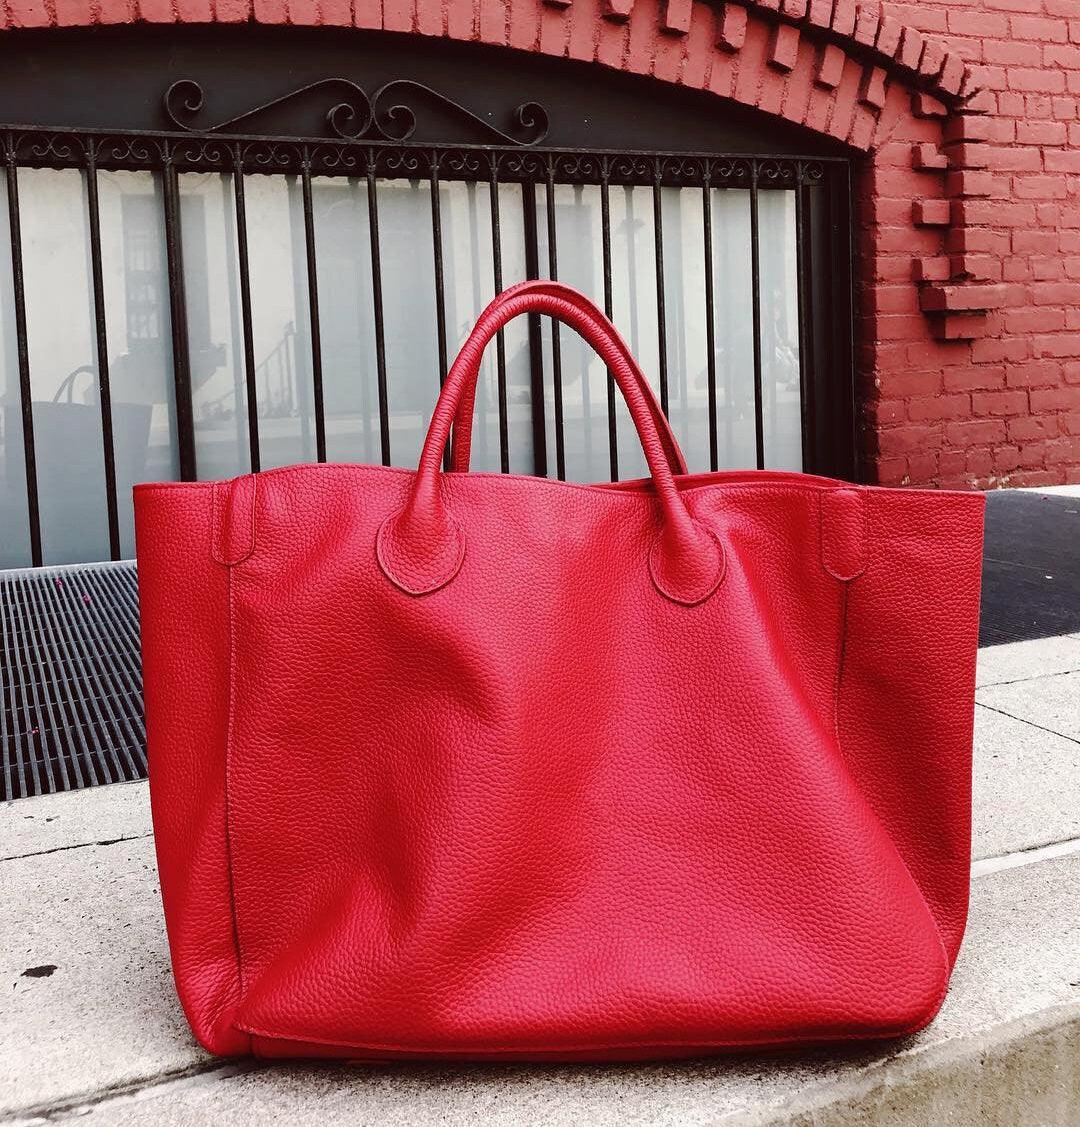 Red Large Leather Tote Bag, Cowhide Leather Bag, Must-have Lady Fashion Bag Bright Red, Weekend Bag, Working Bag, Personalized gifts